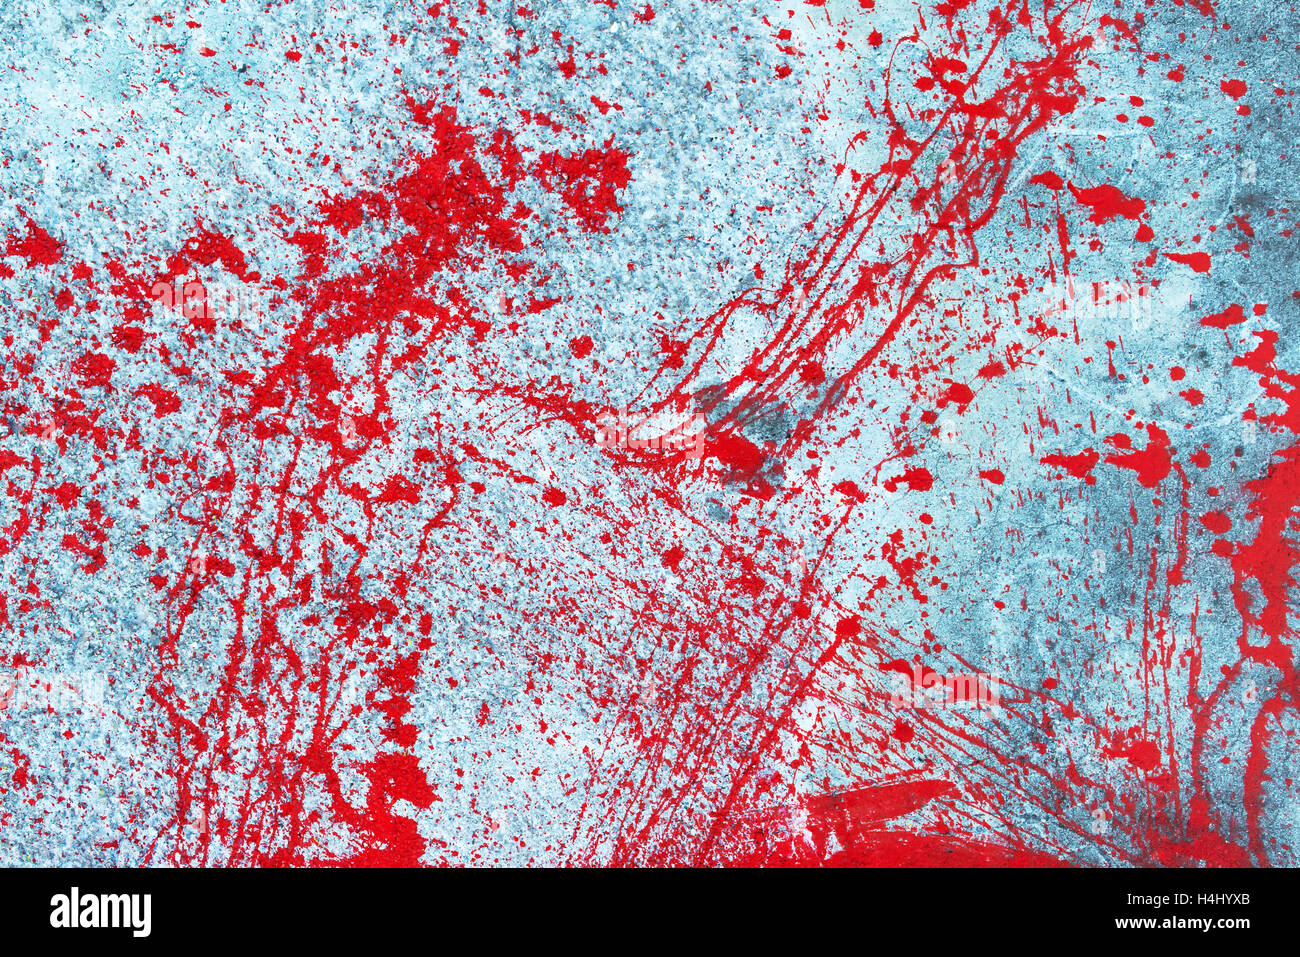 Red blood paint splatter, splash and spray on exterior wall, urban background Stock Photo